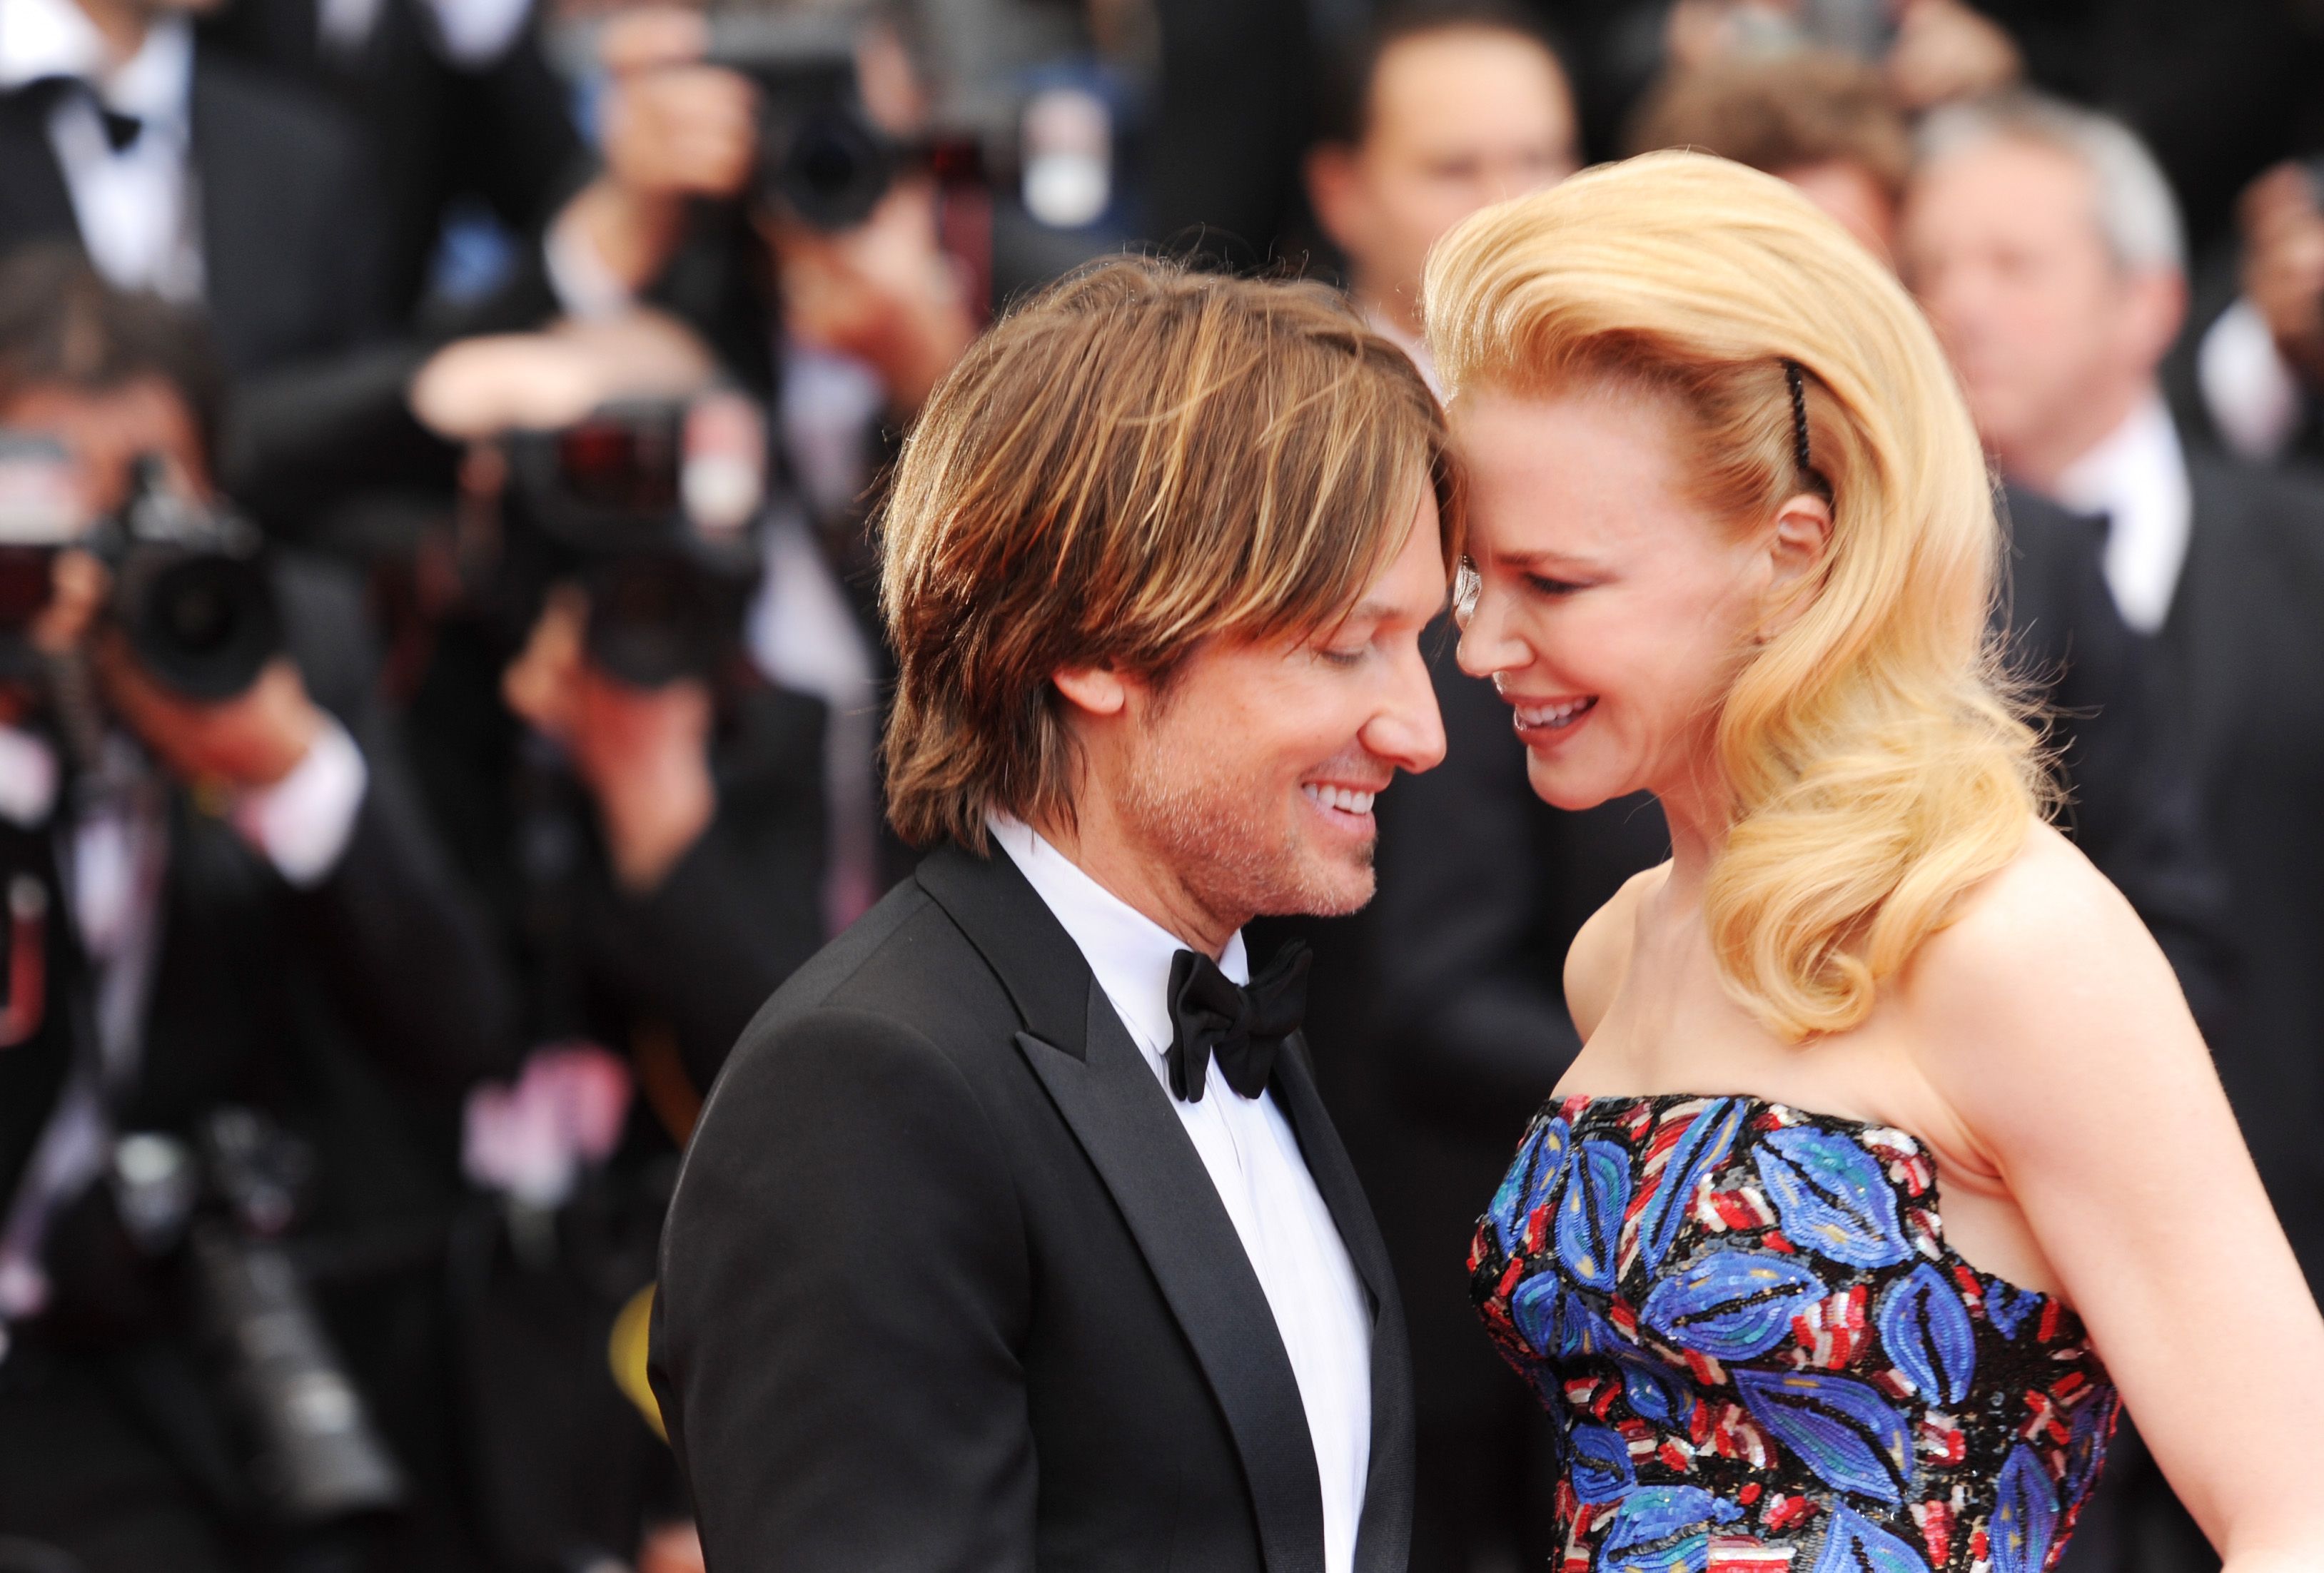 Keith Urban and Nicole Kidman during the "Inside Llewyn Davis" Premiere during the 66th Annual Cannes Film Festival at Grand Theatre Lumiere on May 19, 2013 in Cannes, France. | Source: Getty Images